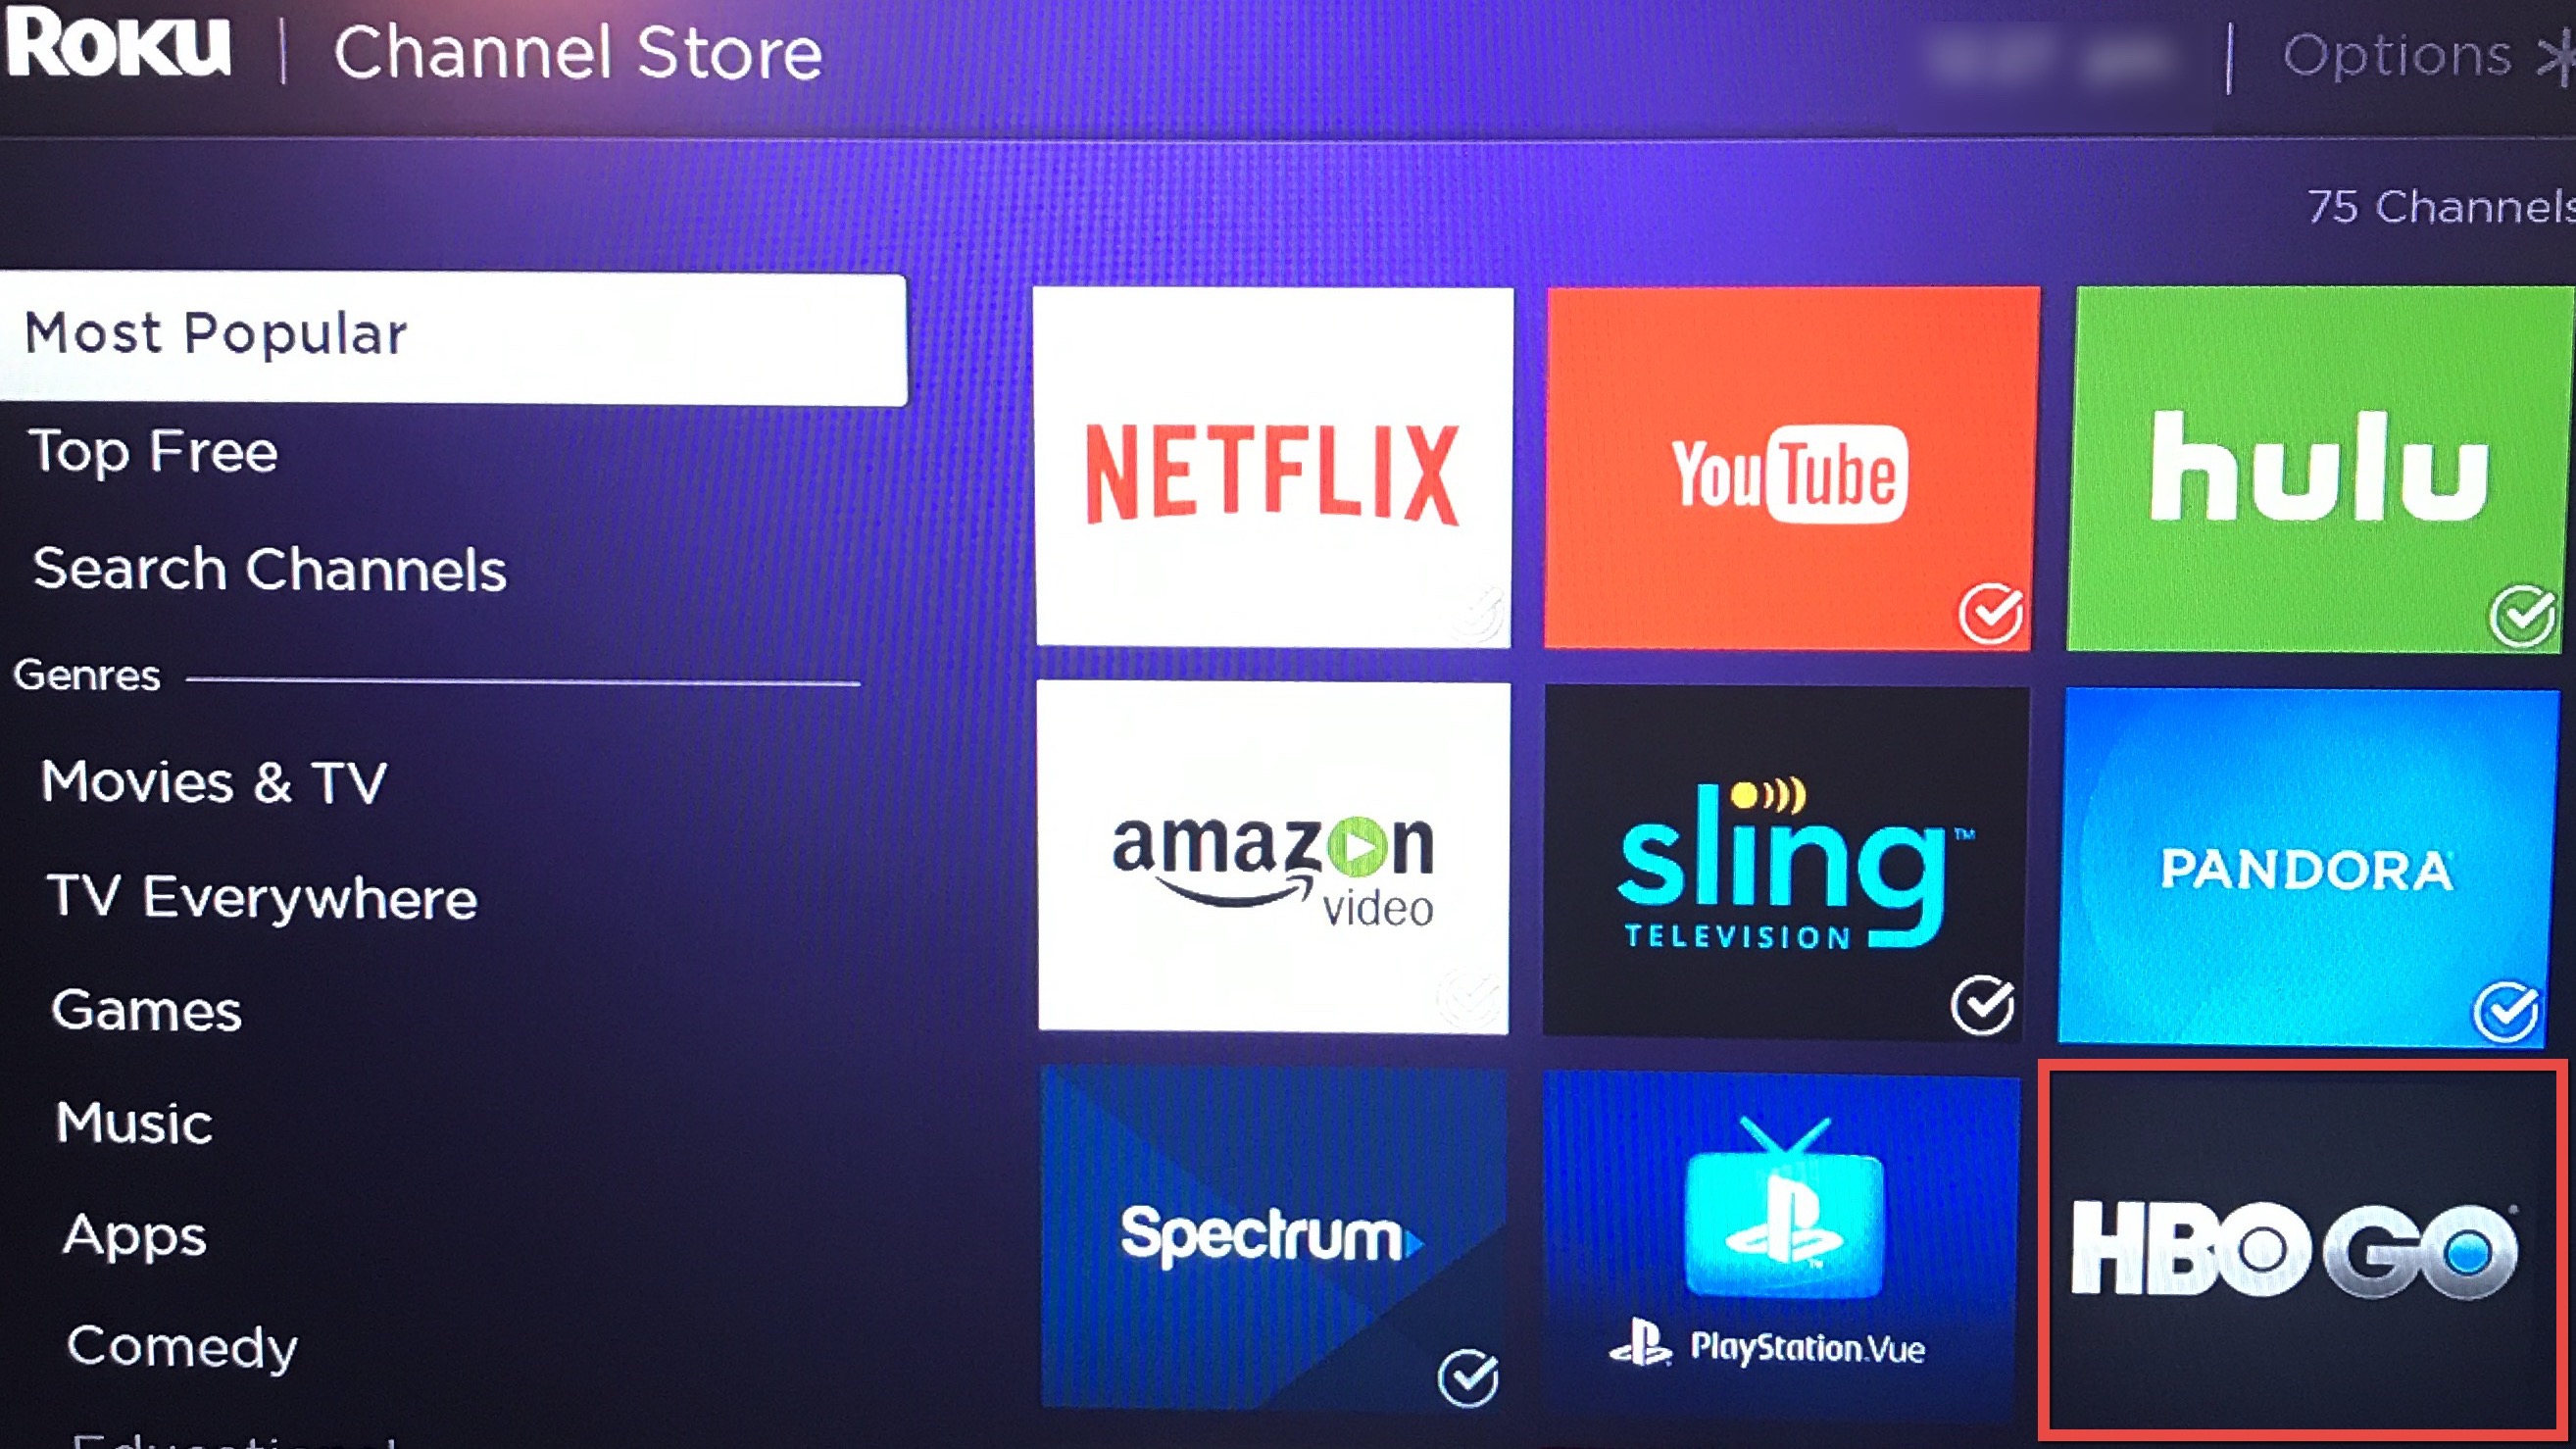 How to use HBO Go on Roku